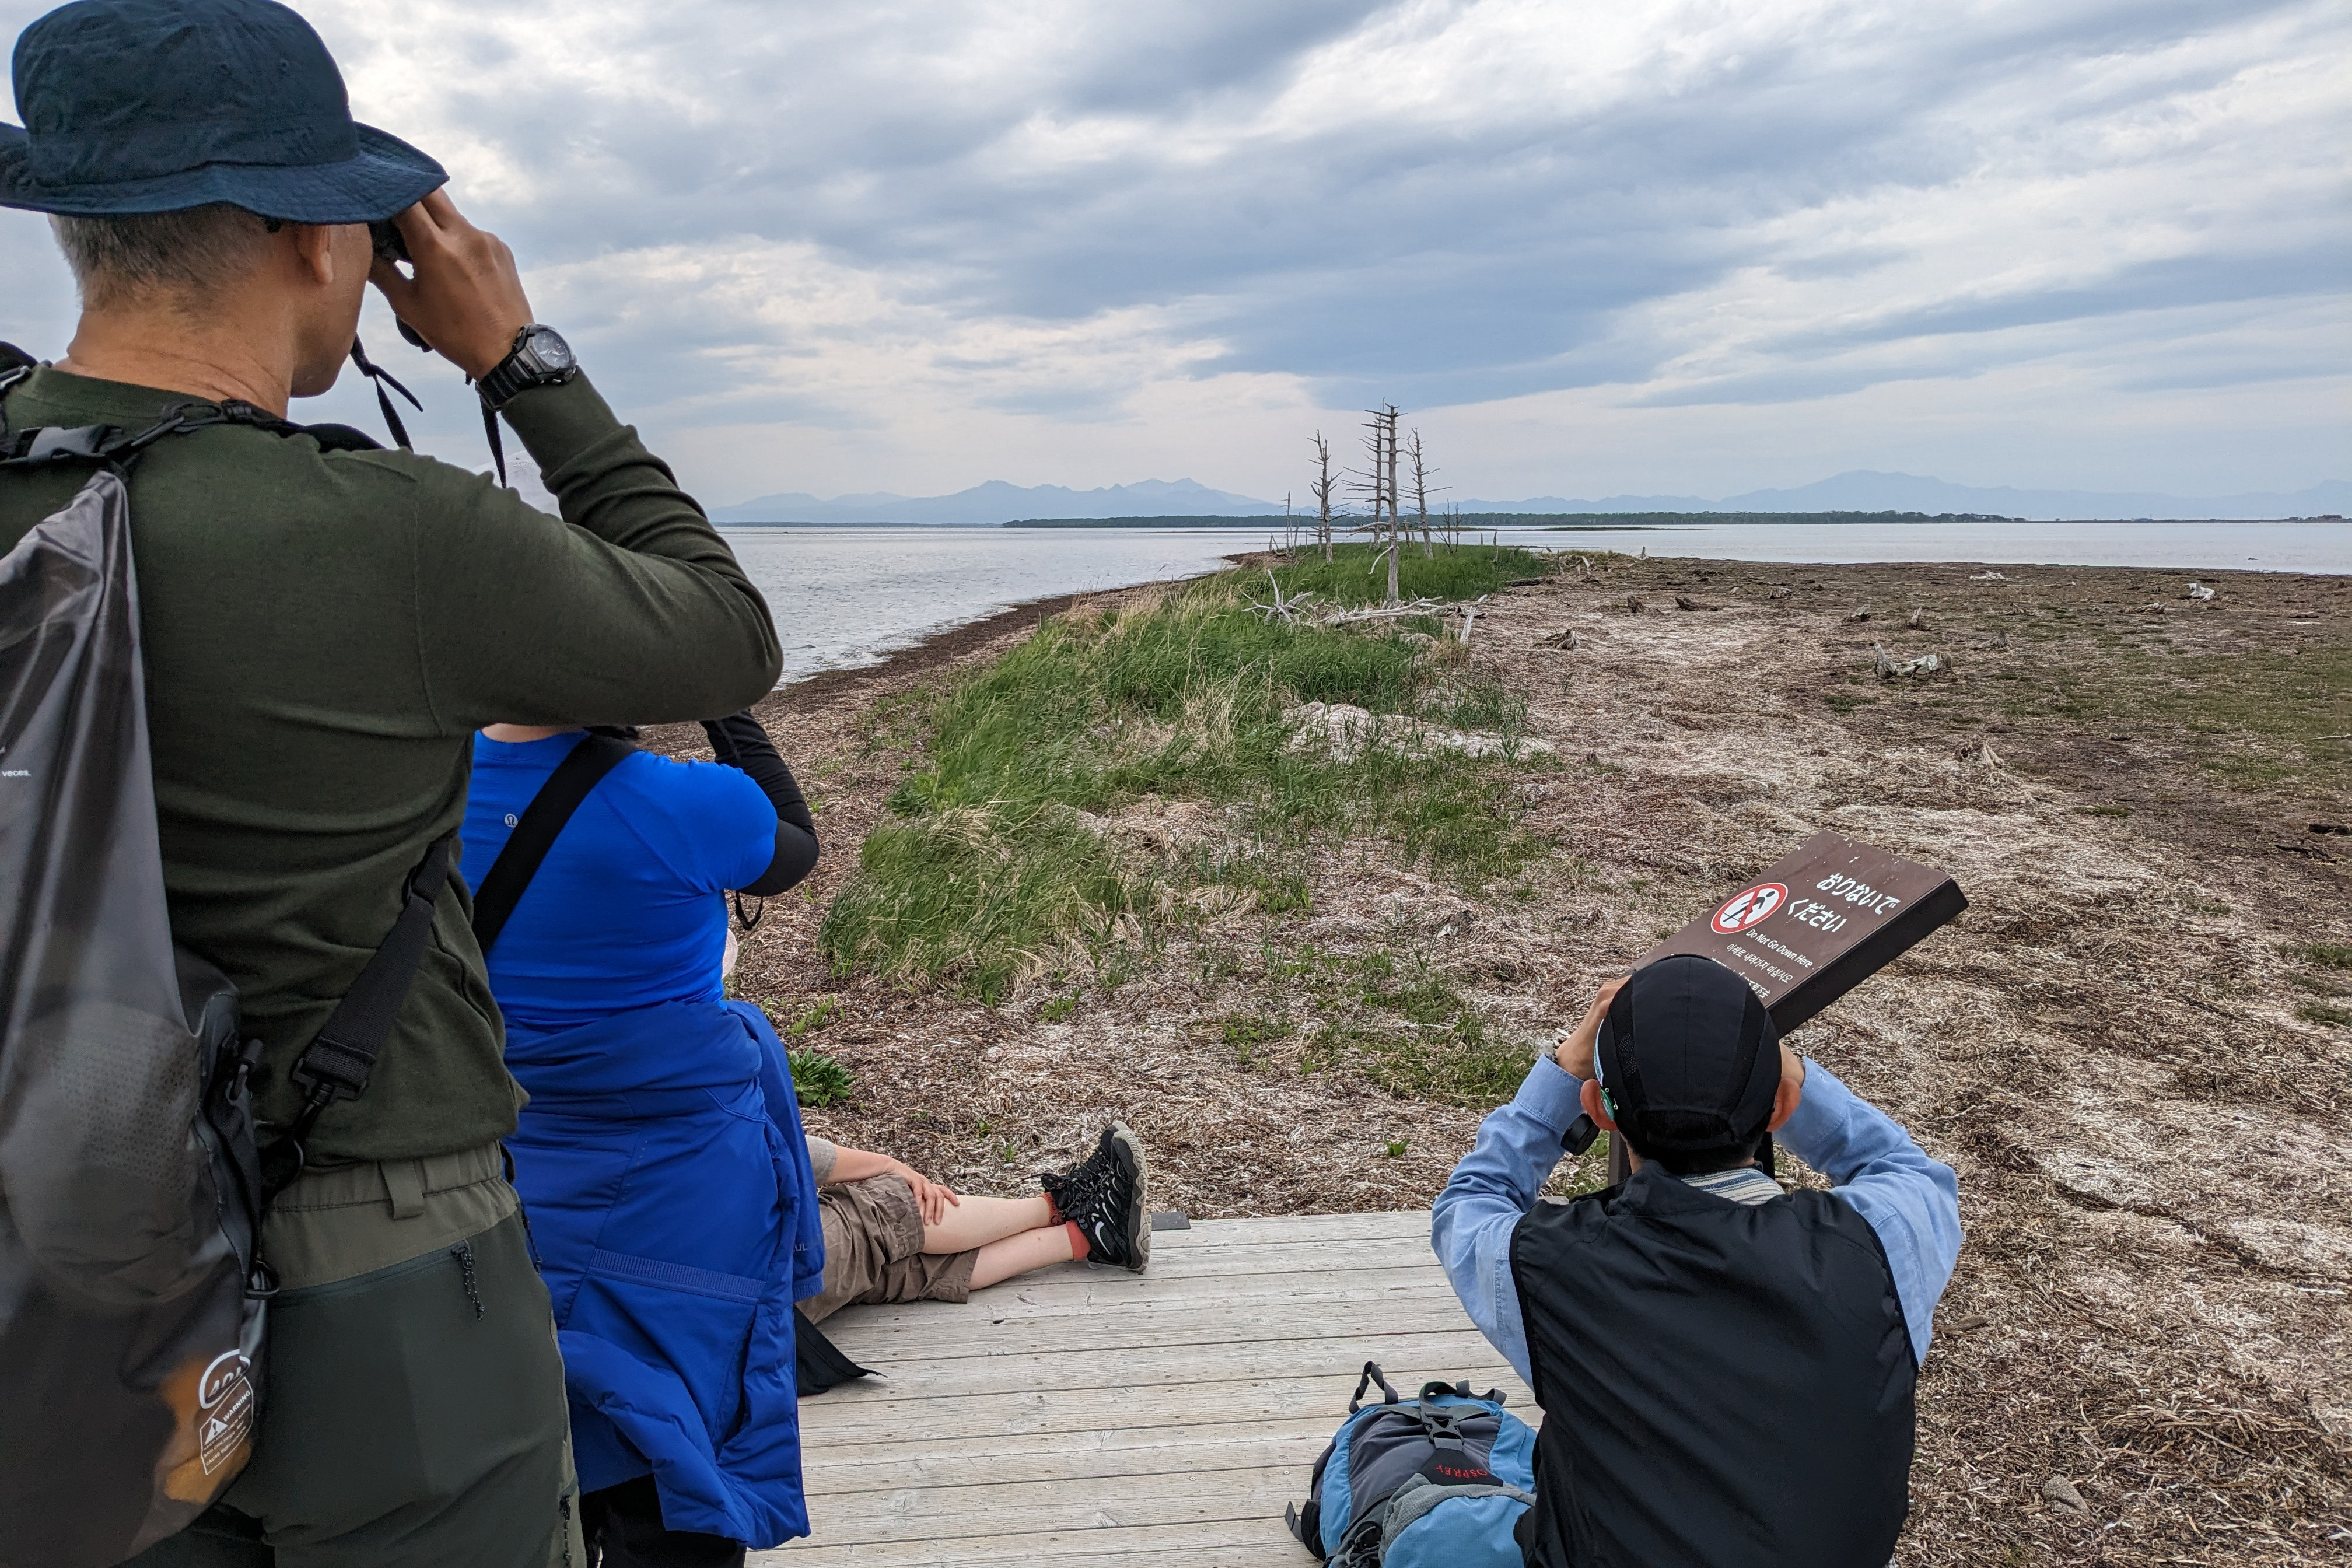 A group of birdwatchers sit on a wooden deck surrounded by sand and sea. They look into the distance towards some standing dead trees and mountains in the distance